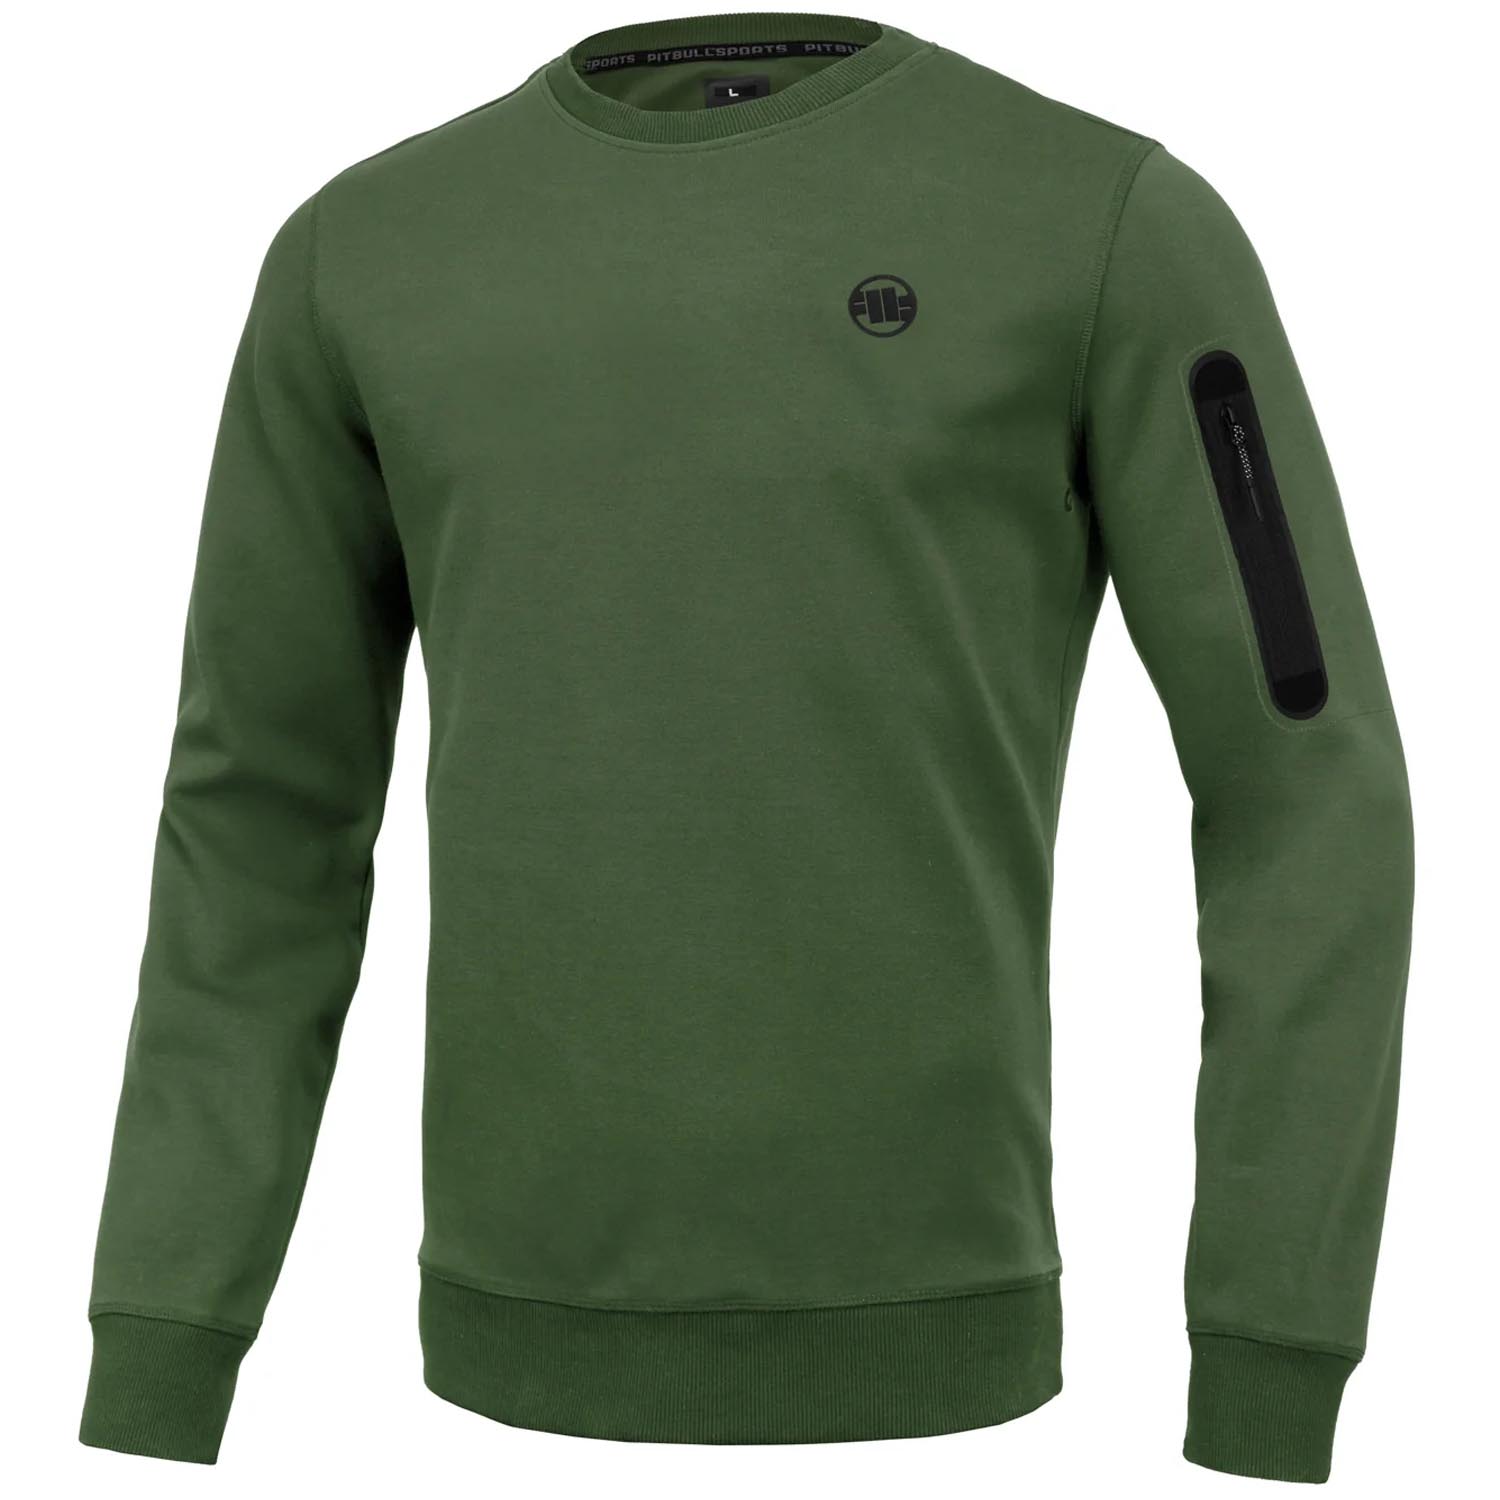 Pit Bull West Coast Pullover, Seahill, olive